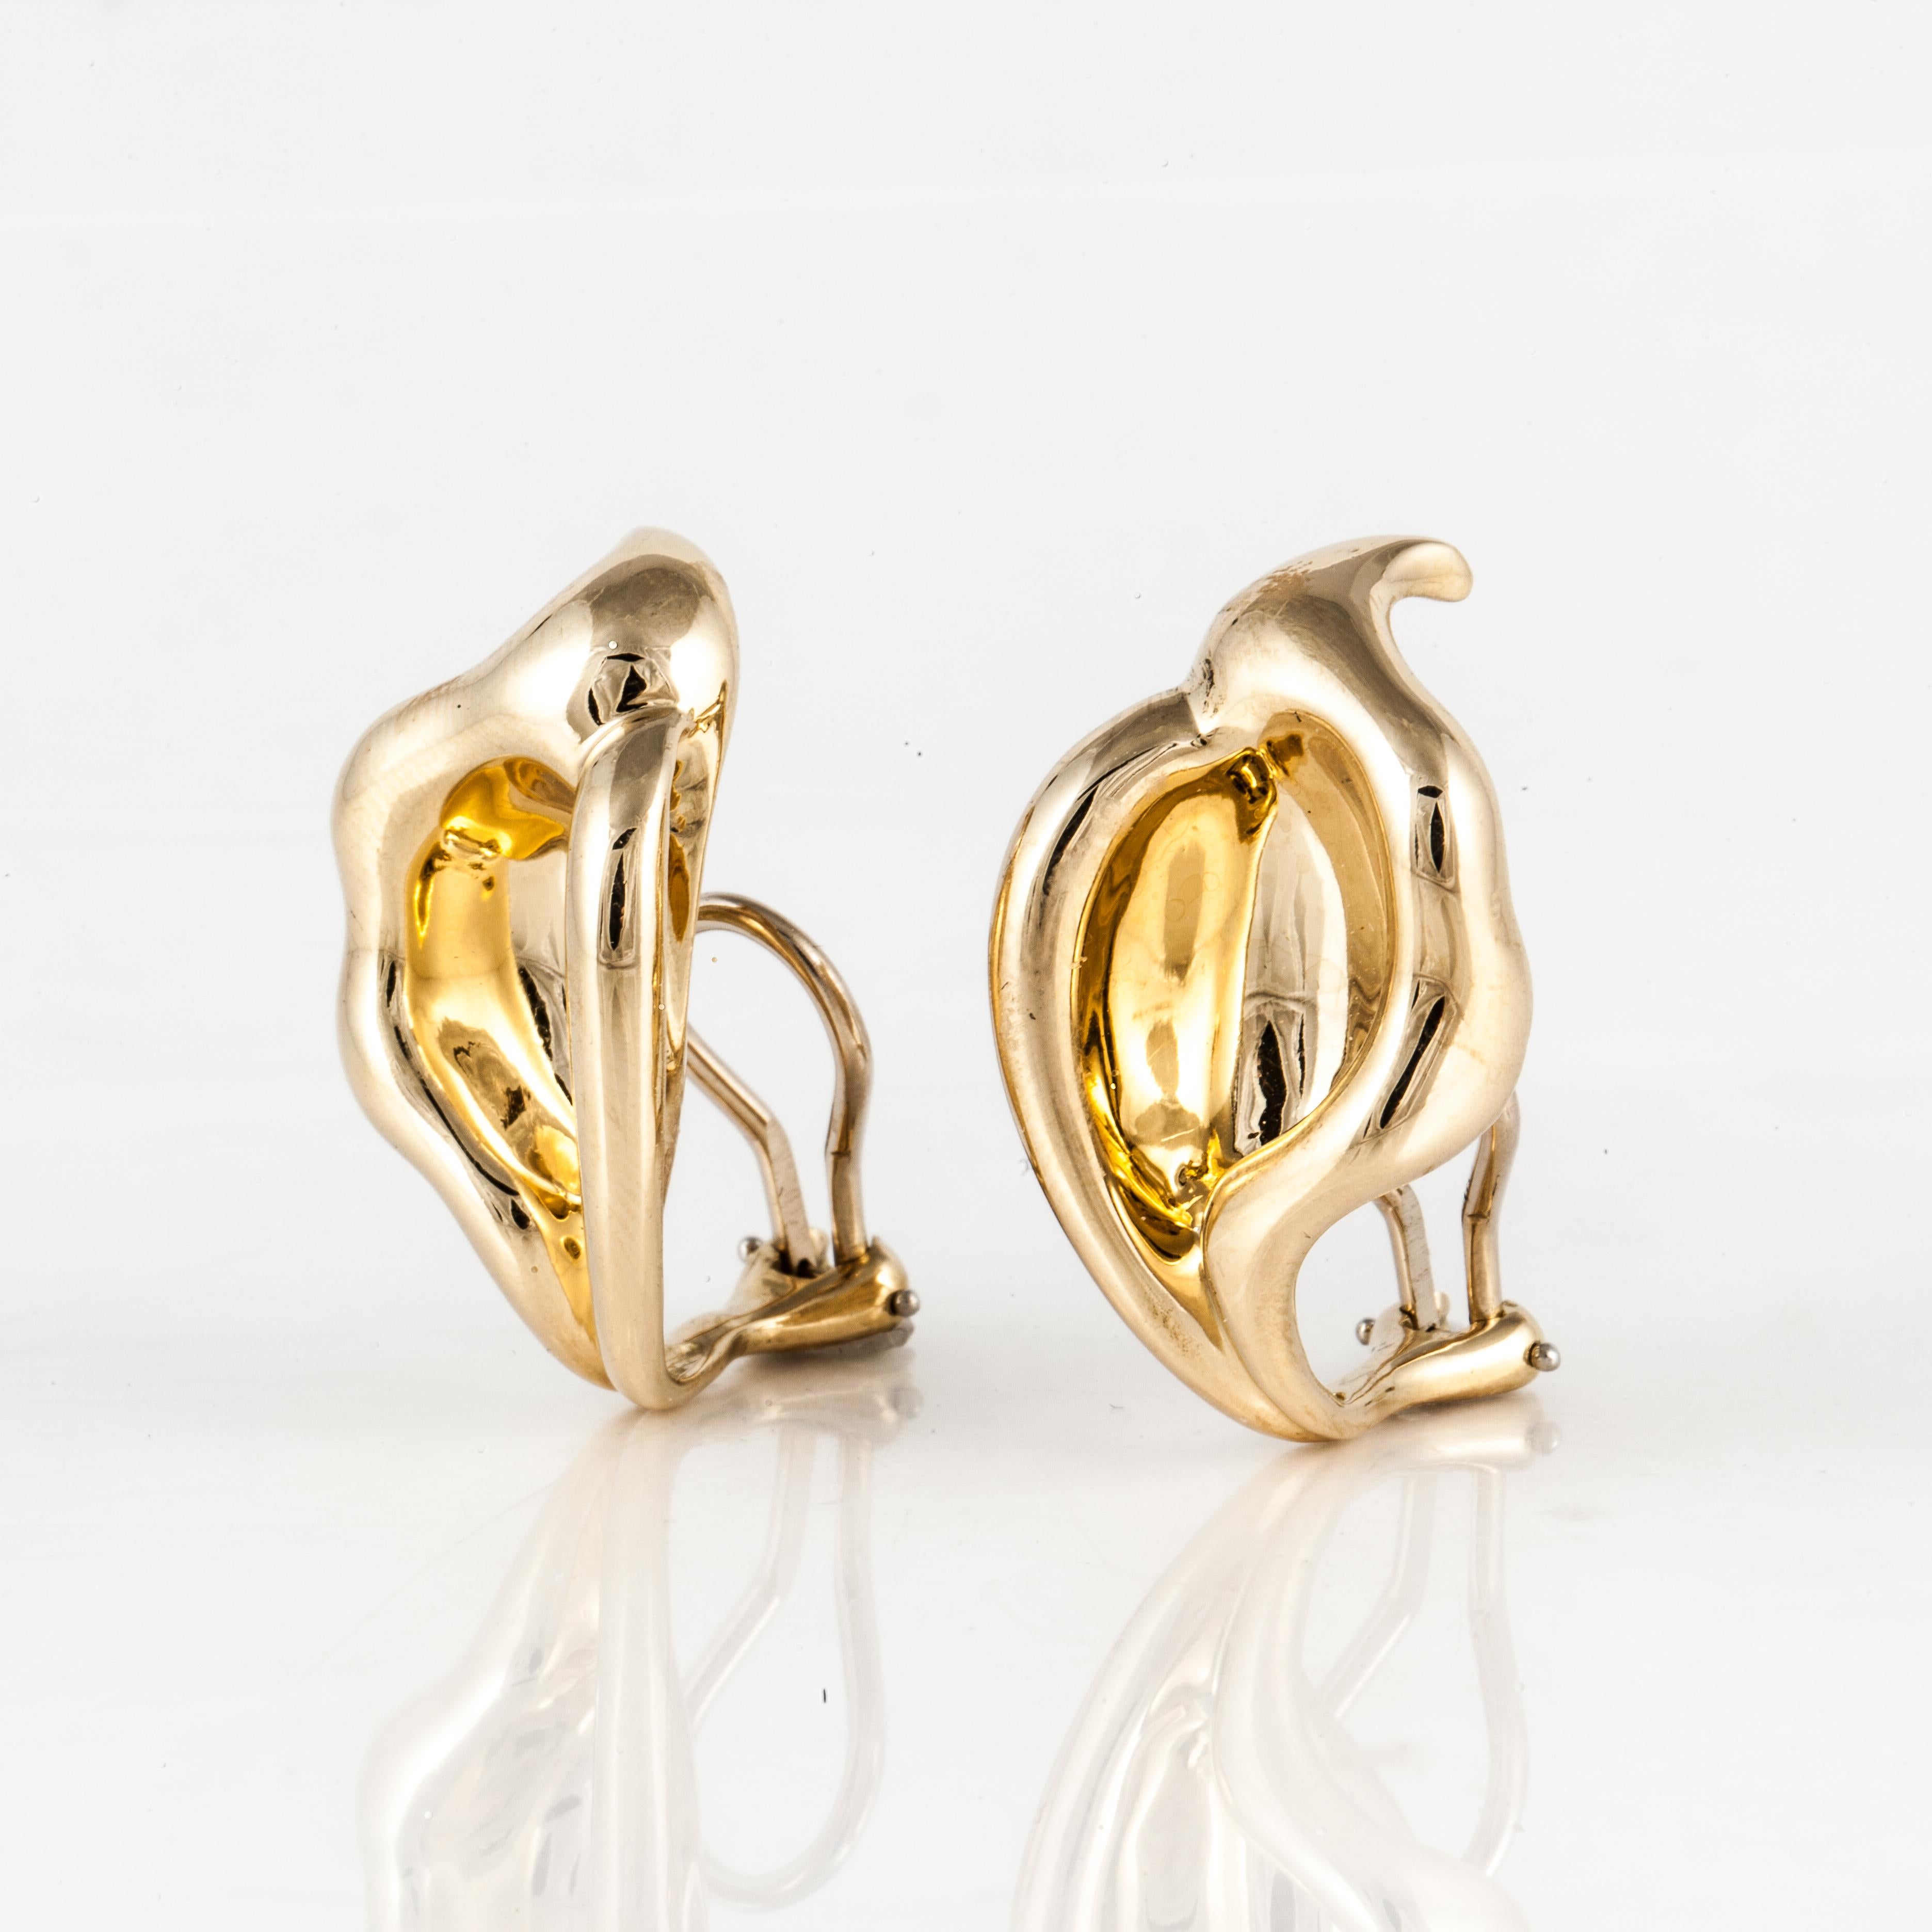 Elsa Peretti for Tiffany & Co. calla lily earrings in 18K yellow gold. They measure 1 inch long and 5/8 inches wide.  These earrings are clip style.